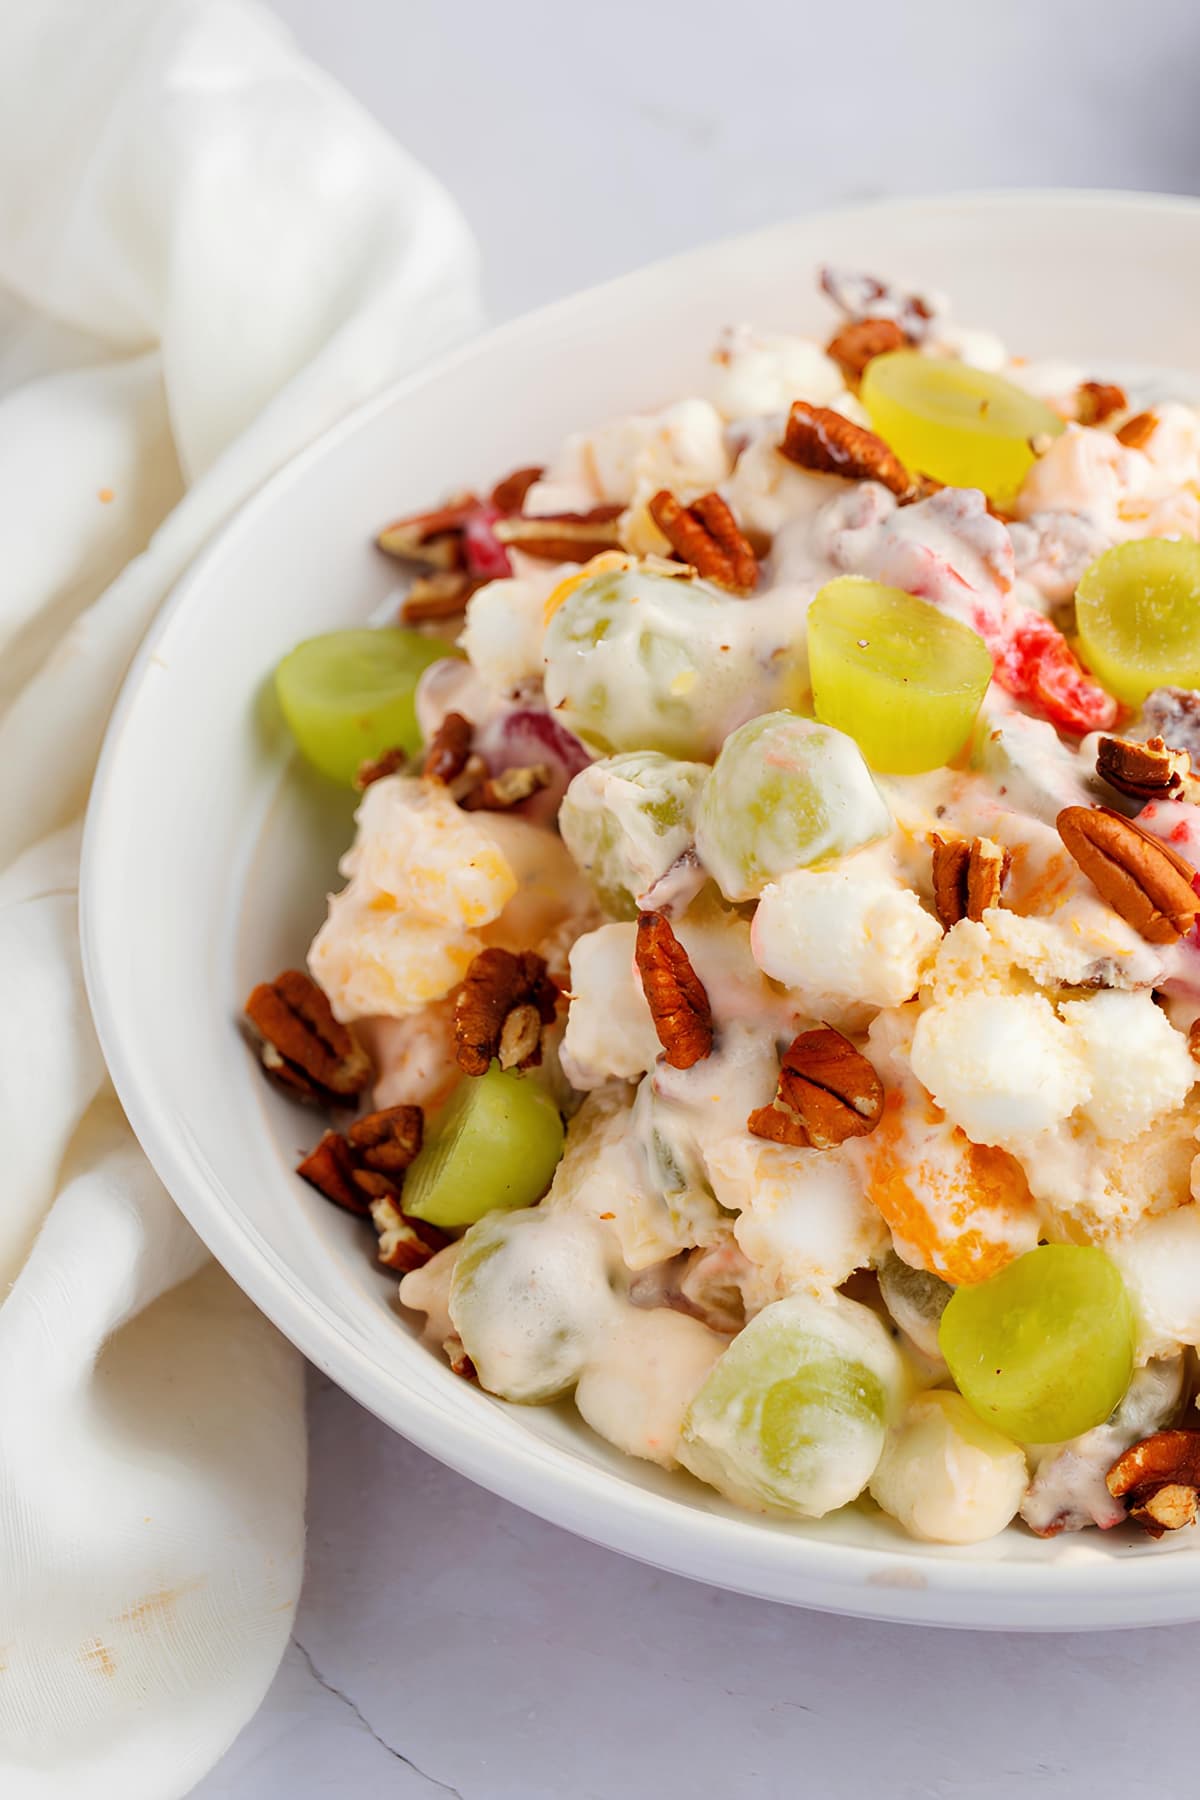 Christmas Fruit Salad with Grapes, Marshmallows, Cherries and Pecan Nuts